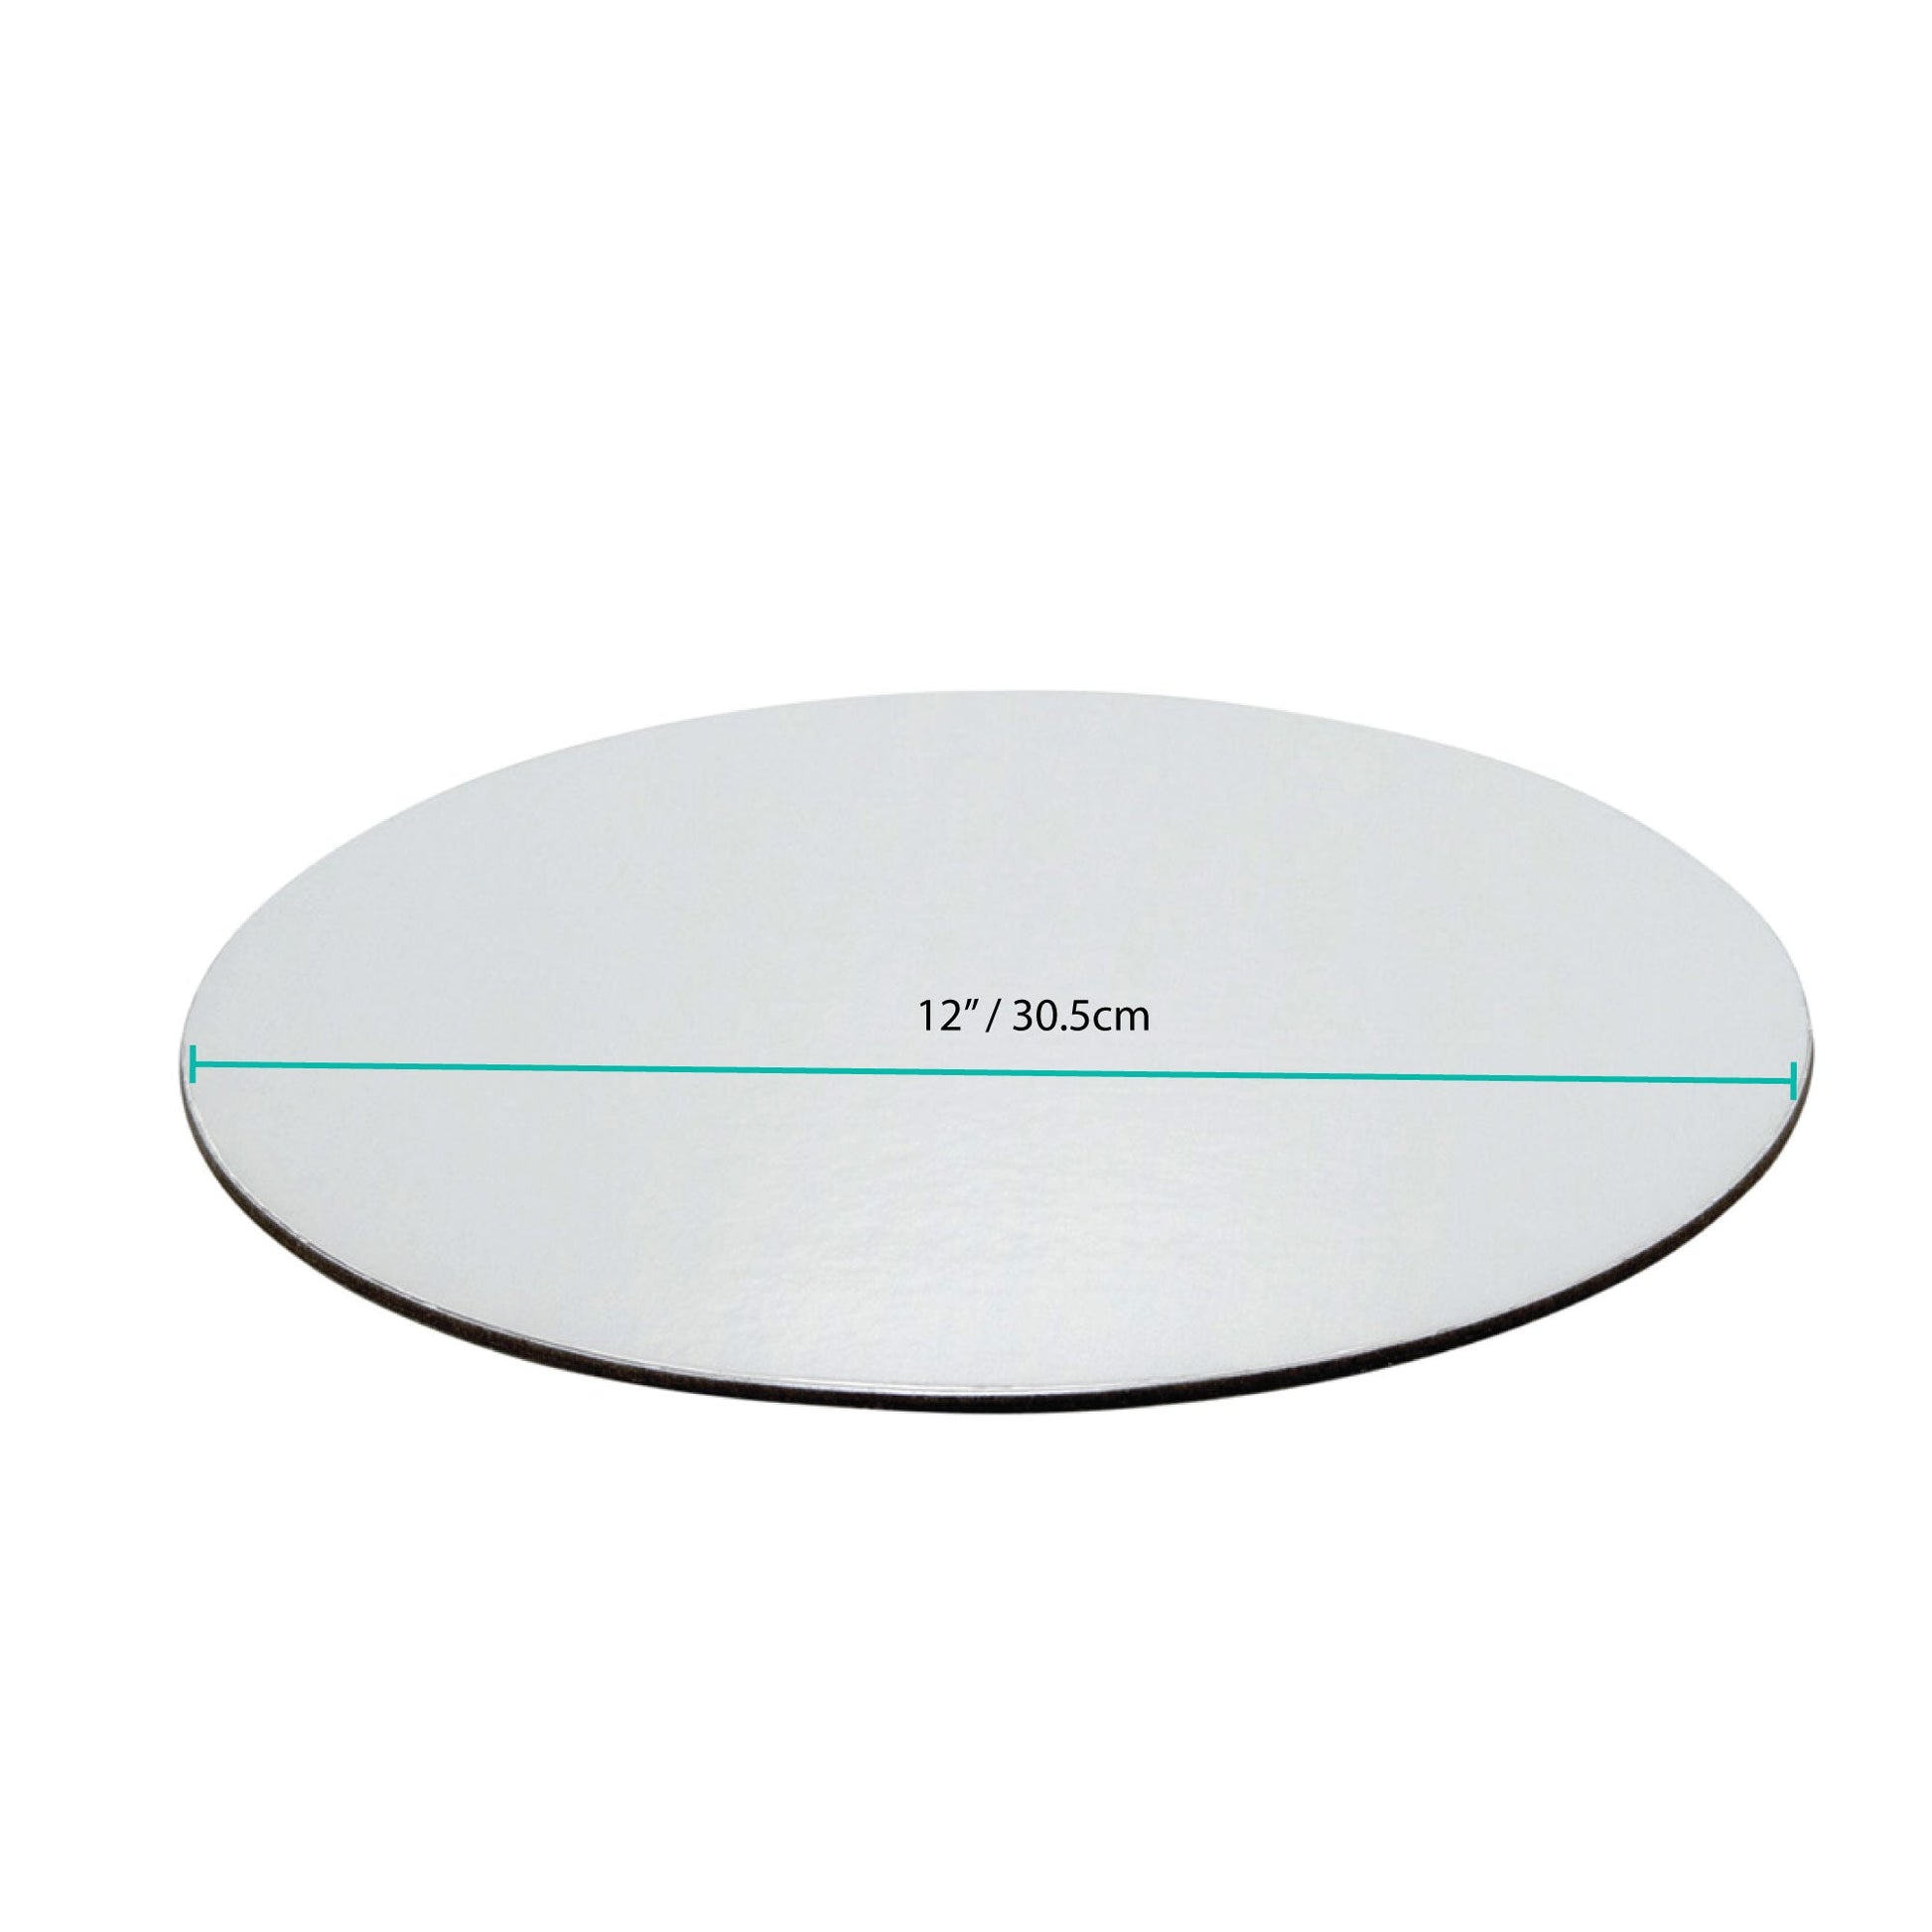 50x 12" Compressed Cake Boards 30.5cm - Round Silver Reusable Aluminium 3mm Base